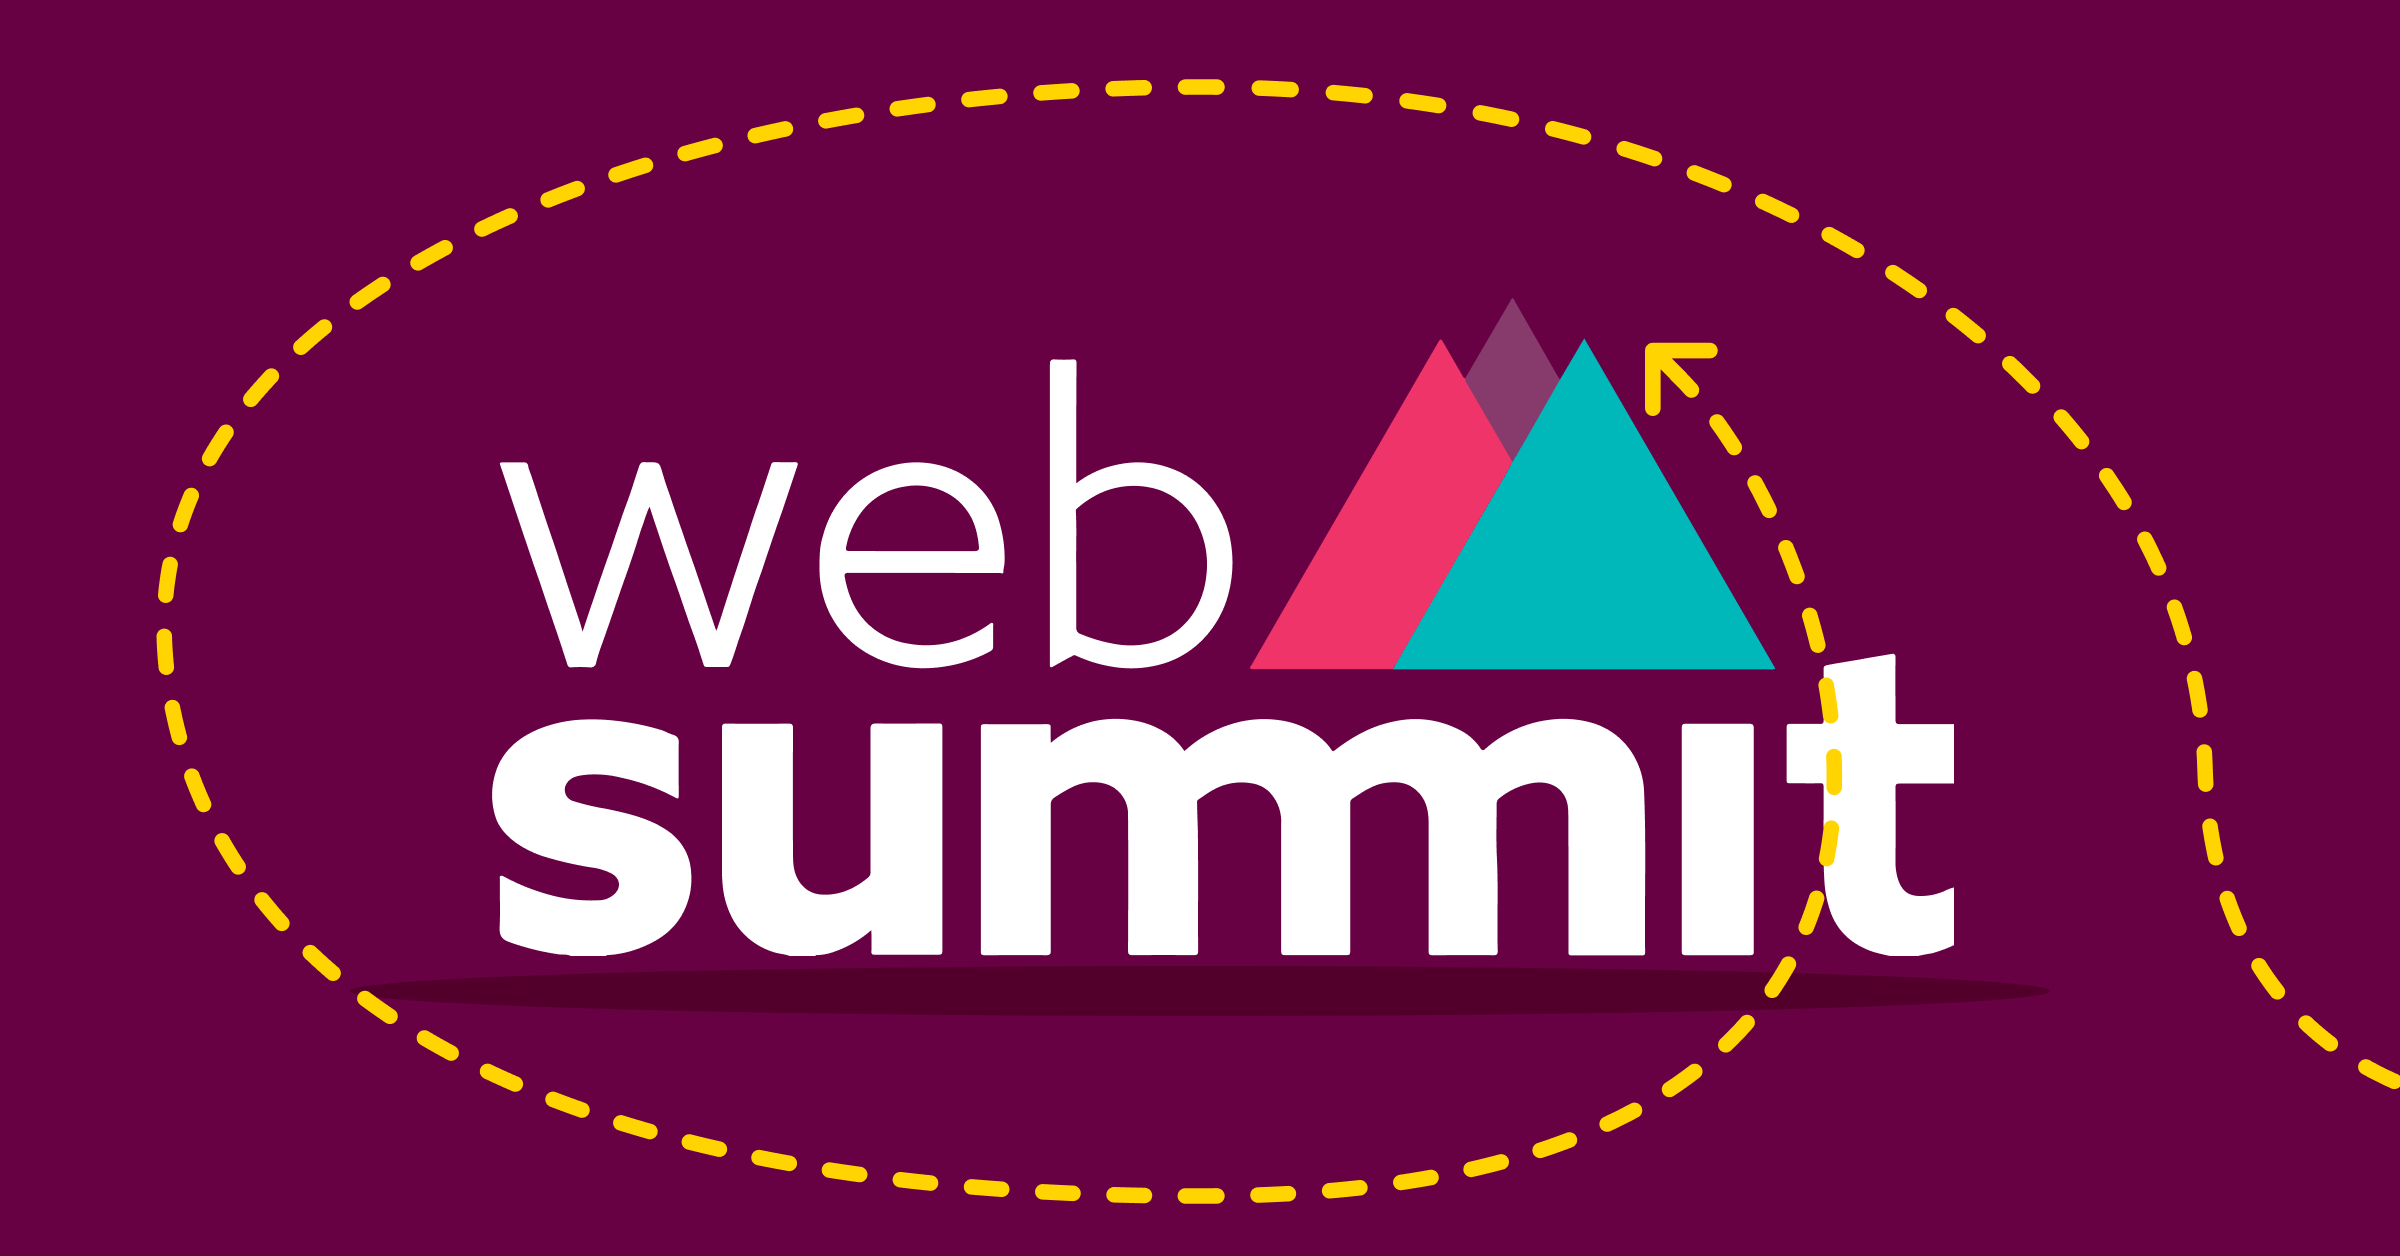 PayCore.io will be exhibiting at Web Summit 2018